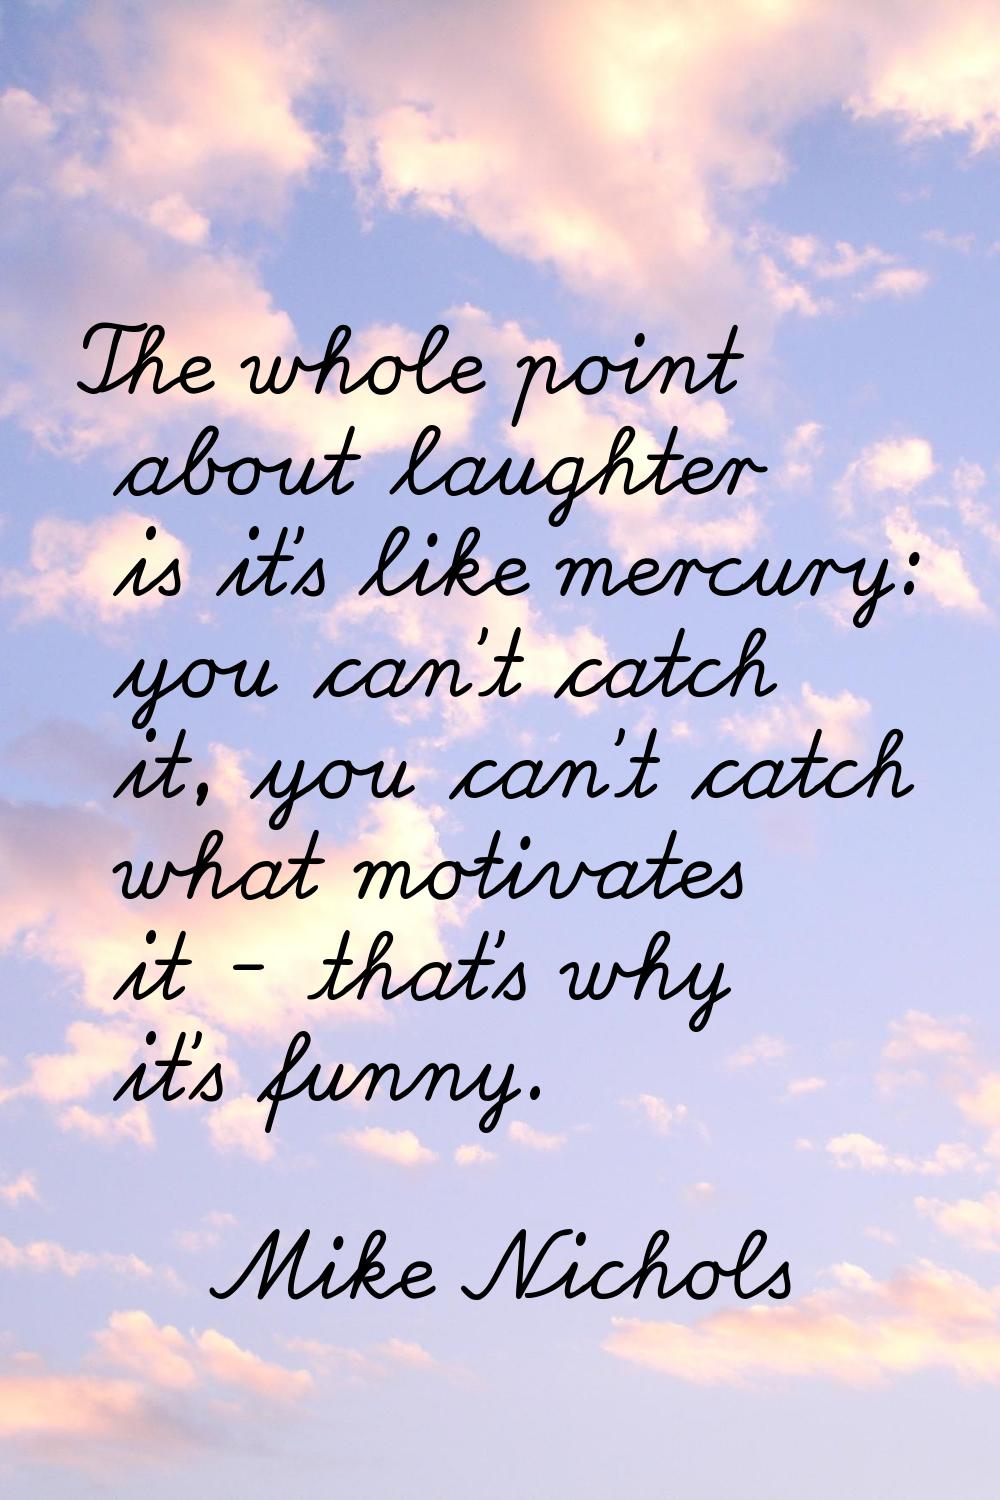 The whole point about laughter is it's like mercury: you can't catch it, you can't catch what motiv